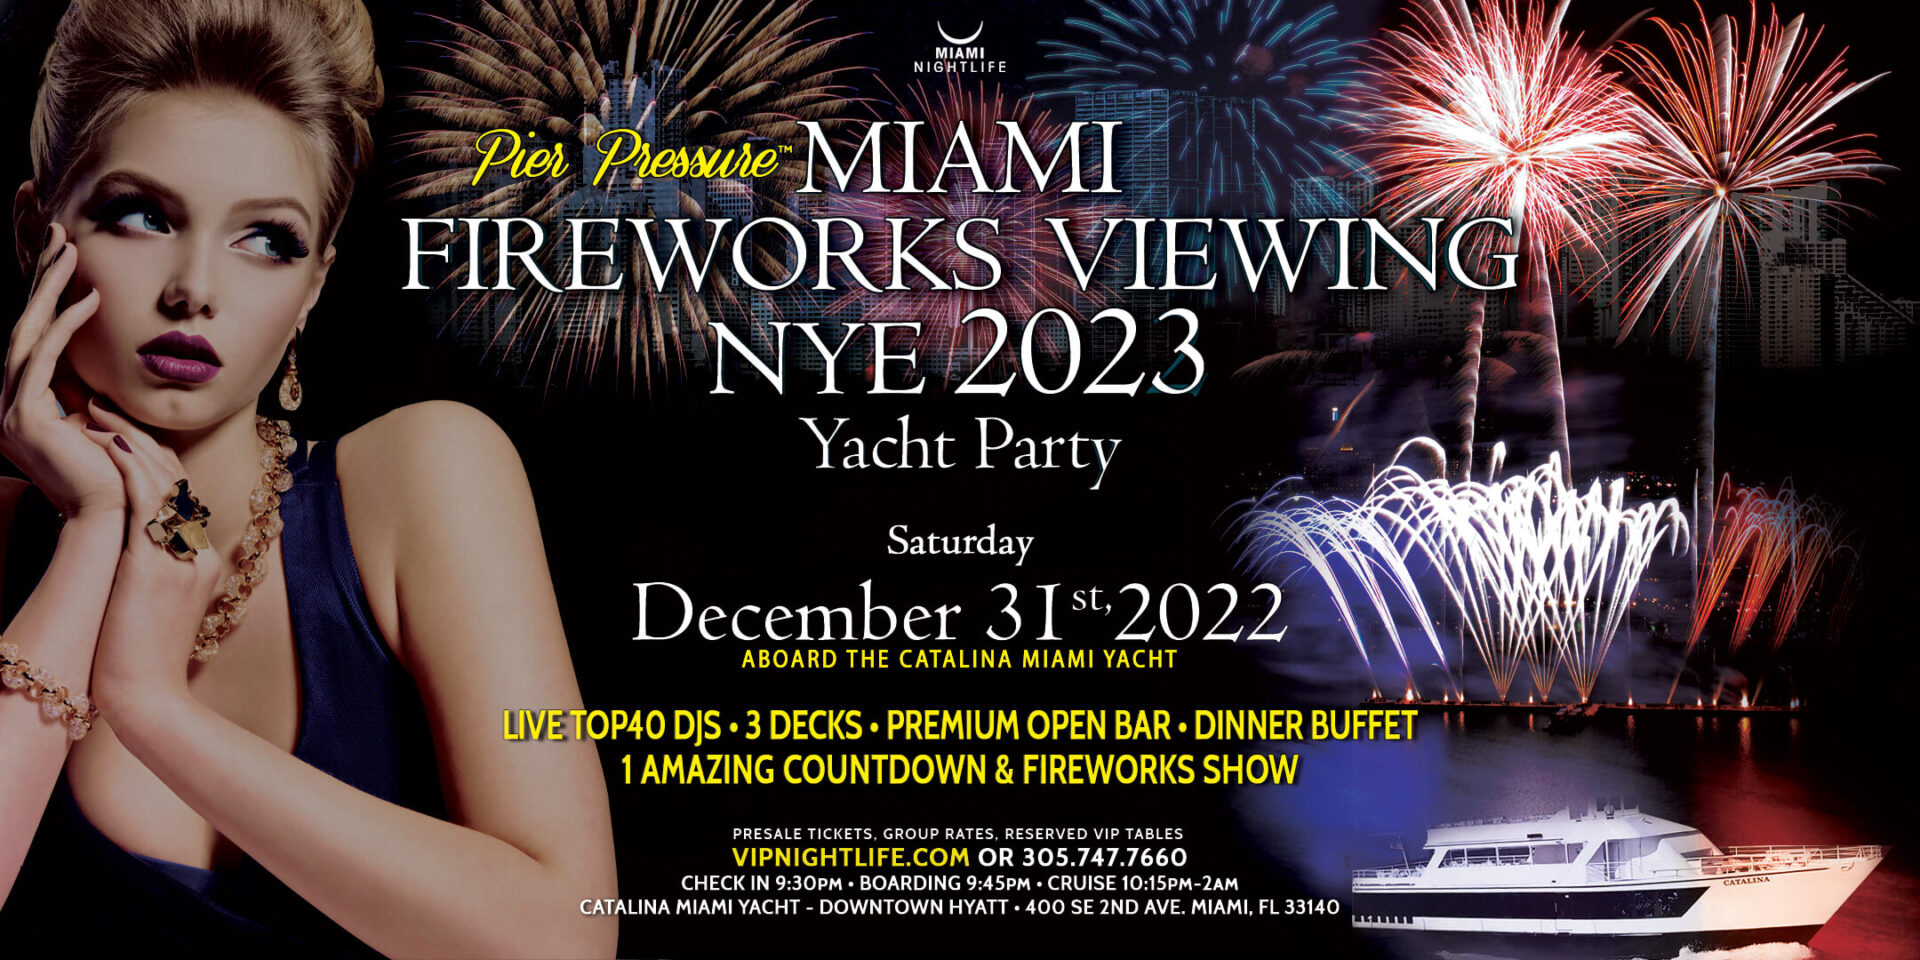 Miami Fireworks Viewing Pier Pressure New Year’s Eve Yacht Party 2023